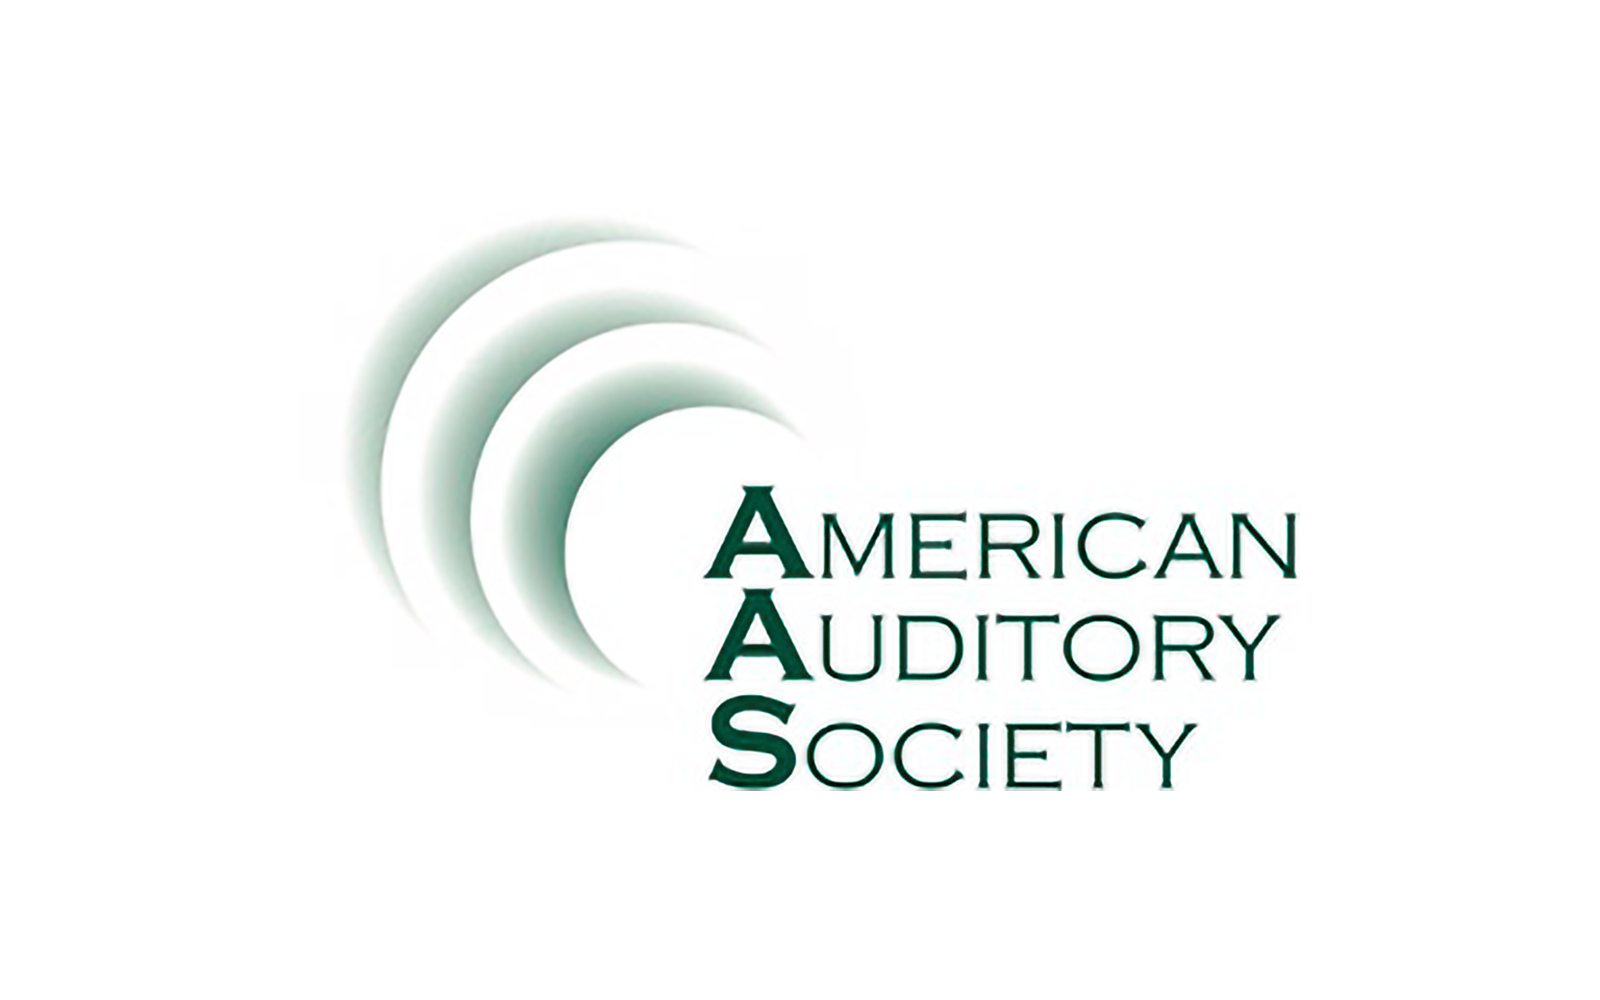 American Auditory Society (AAS) Annual Scientific and Technology